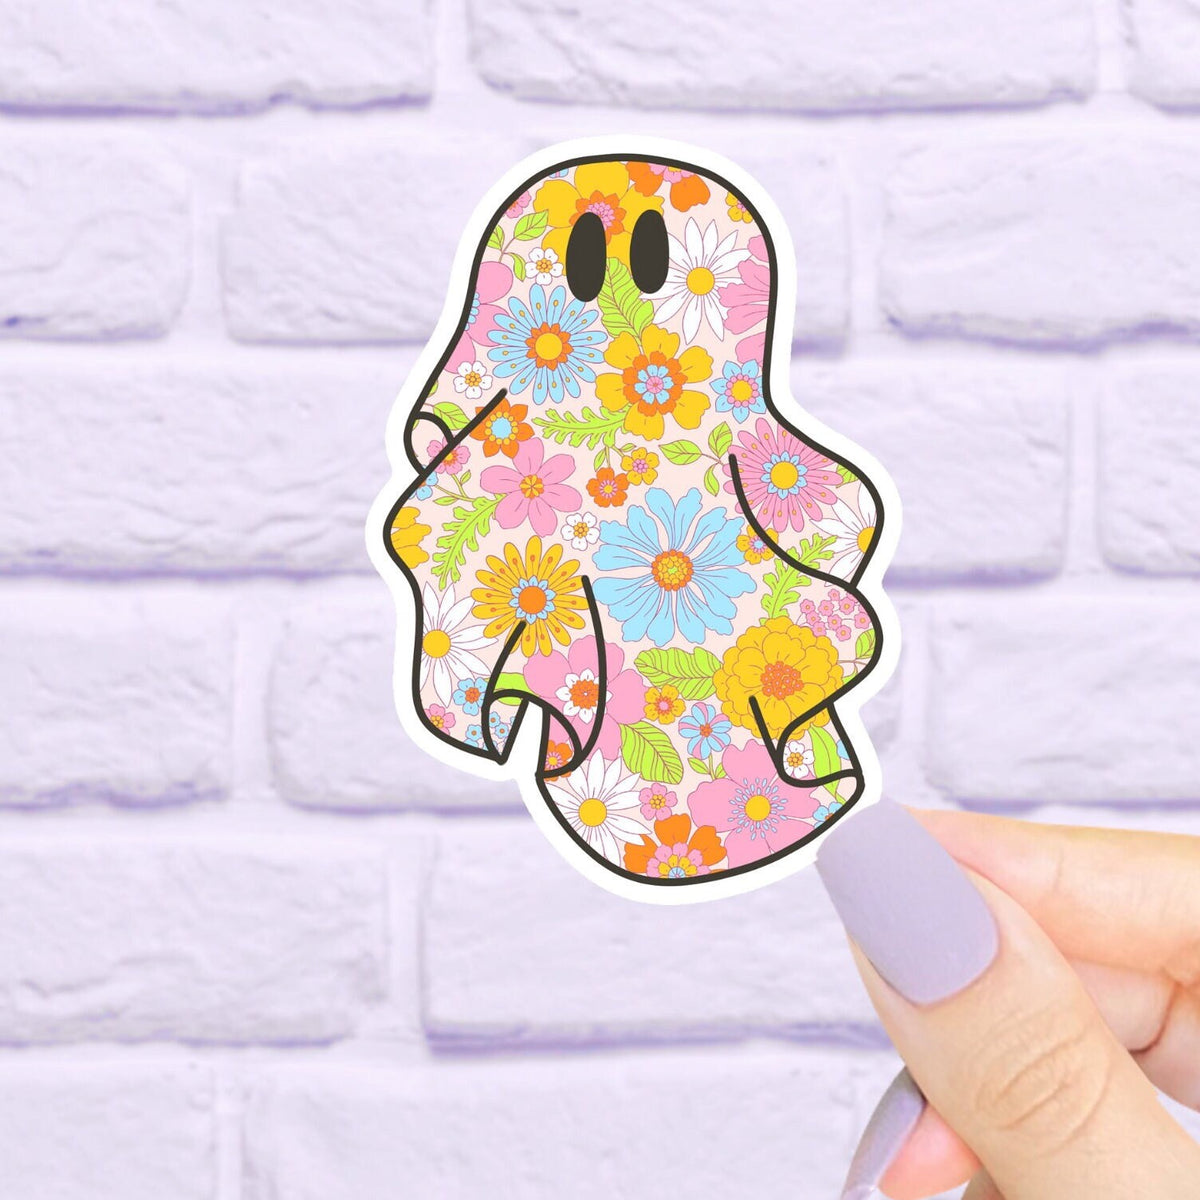 Kindle Sticker, Halloween Sticker, Cute Stickers, Funny Stickers, Laptop Decals, Ghost Stickers